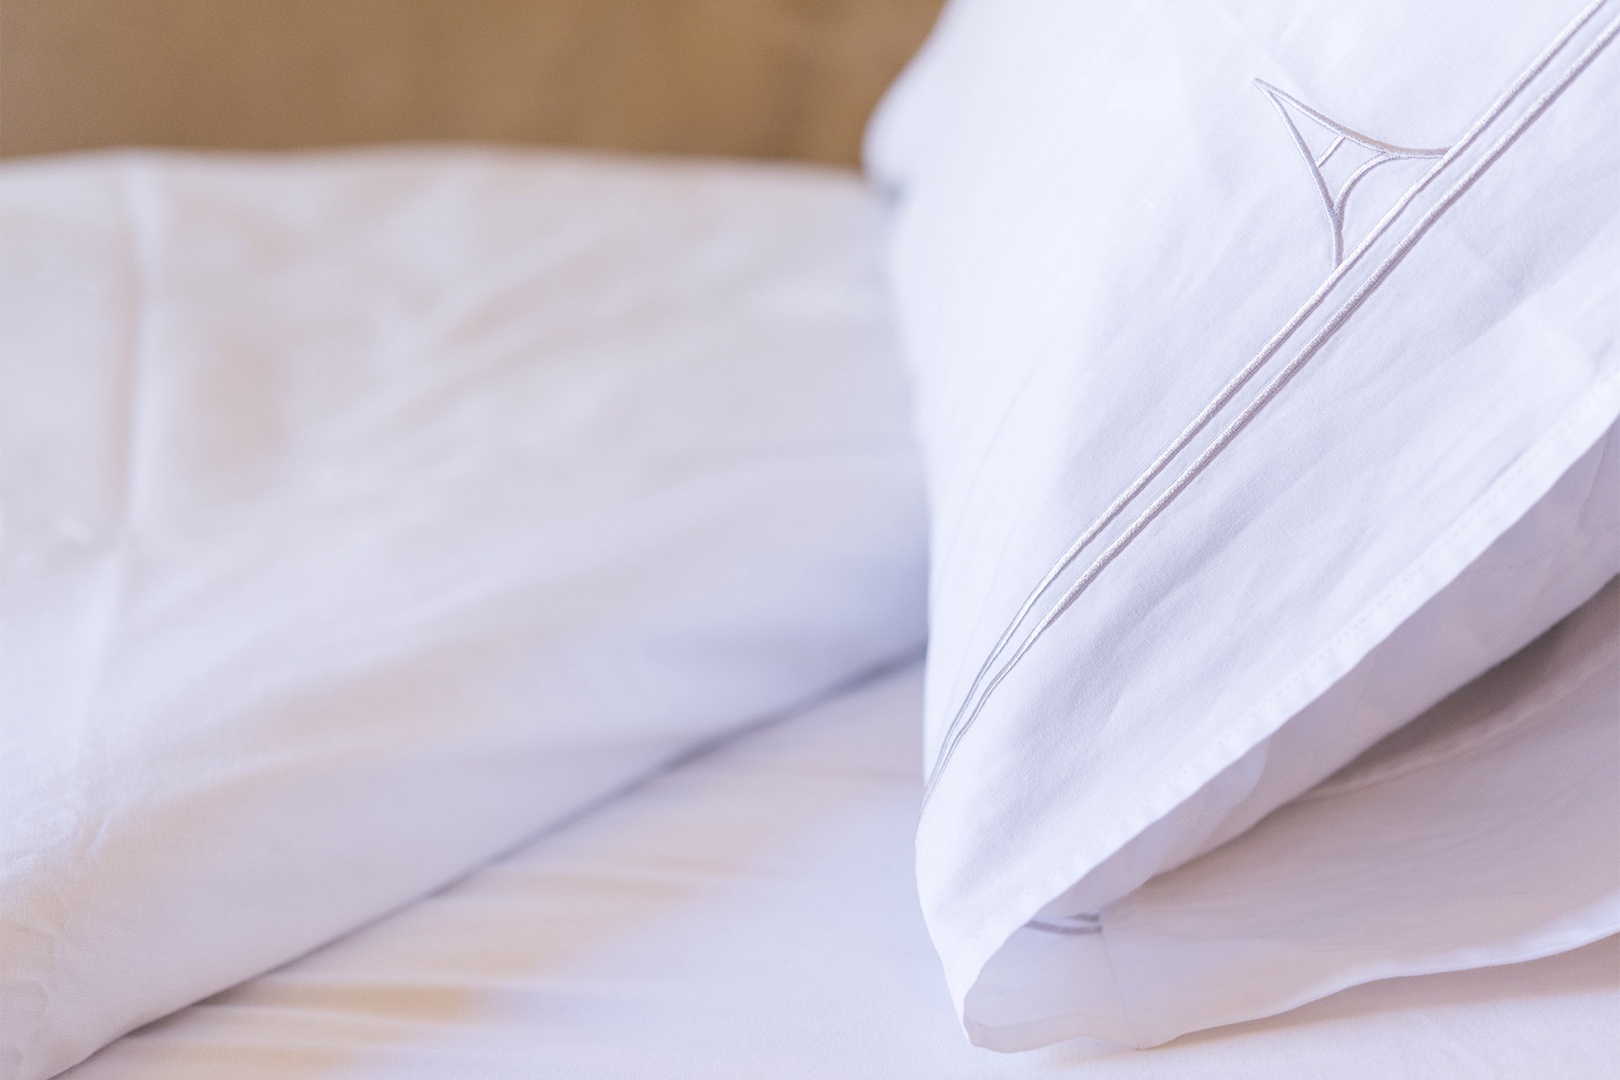 The beds are made with our luxurious custom linens.